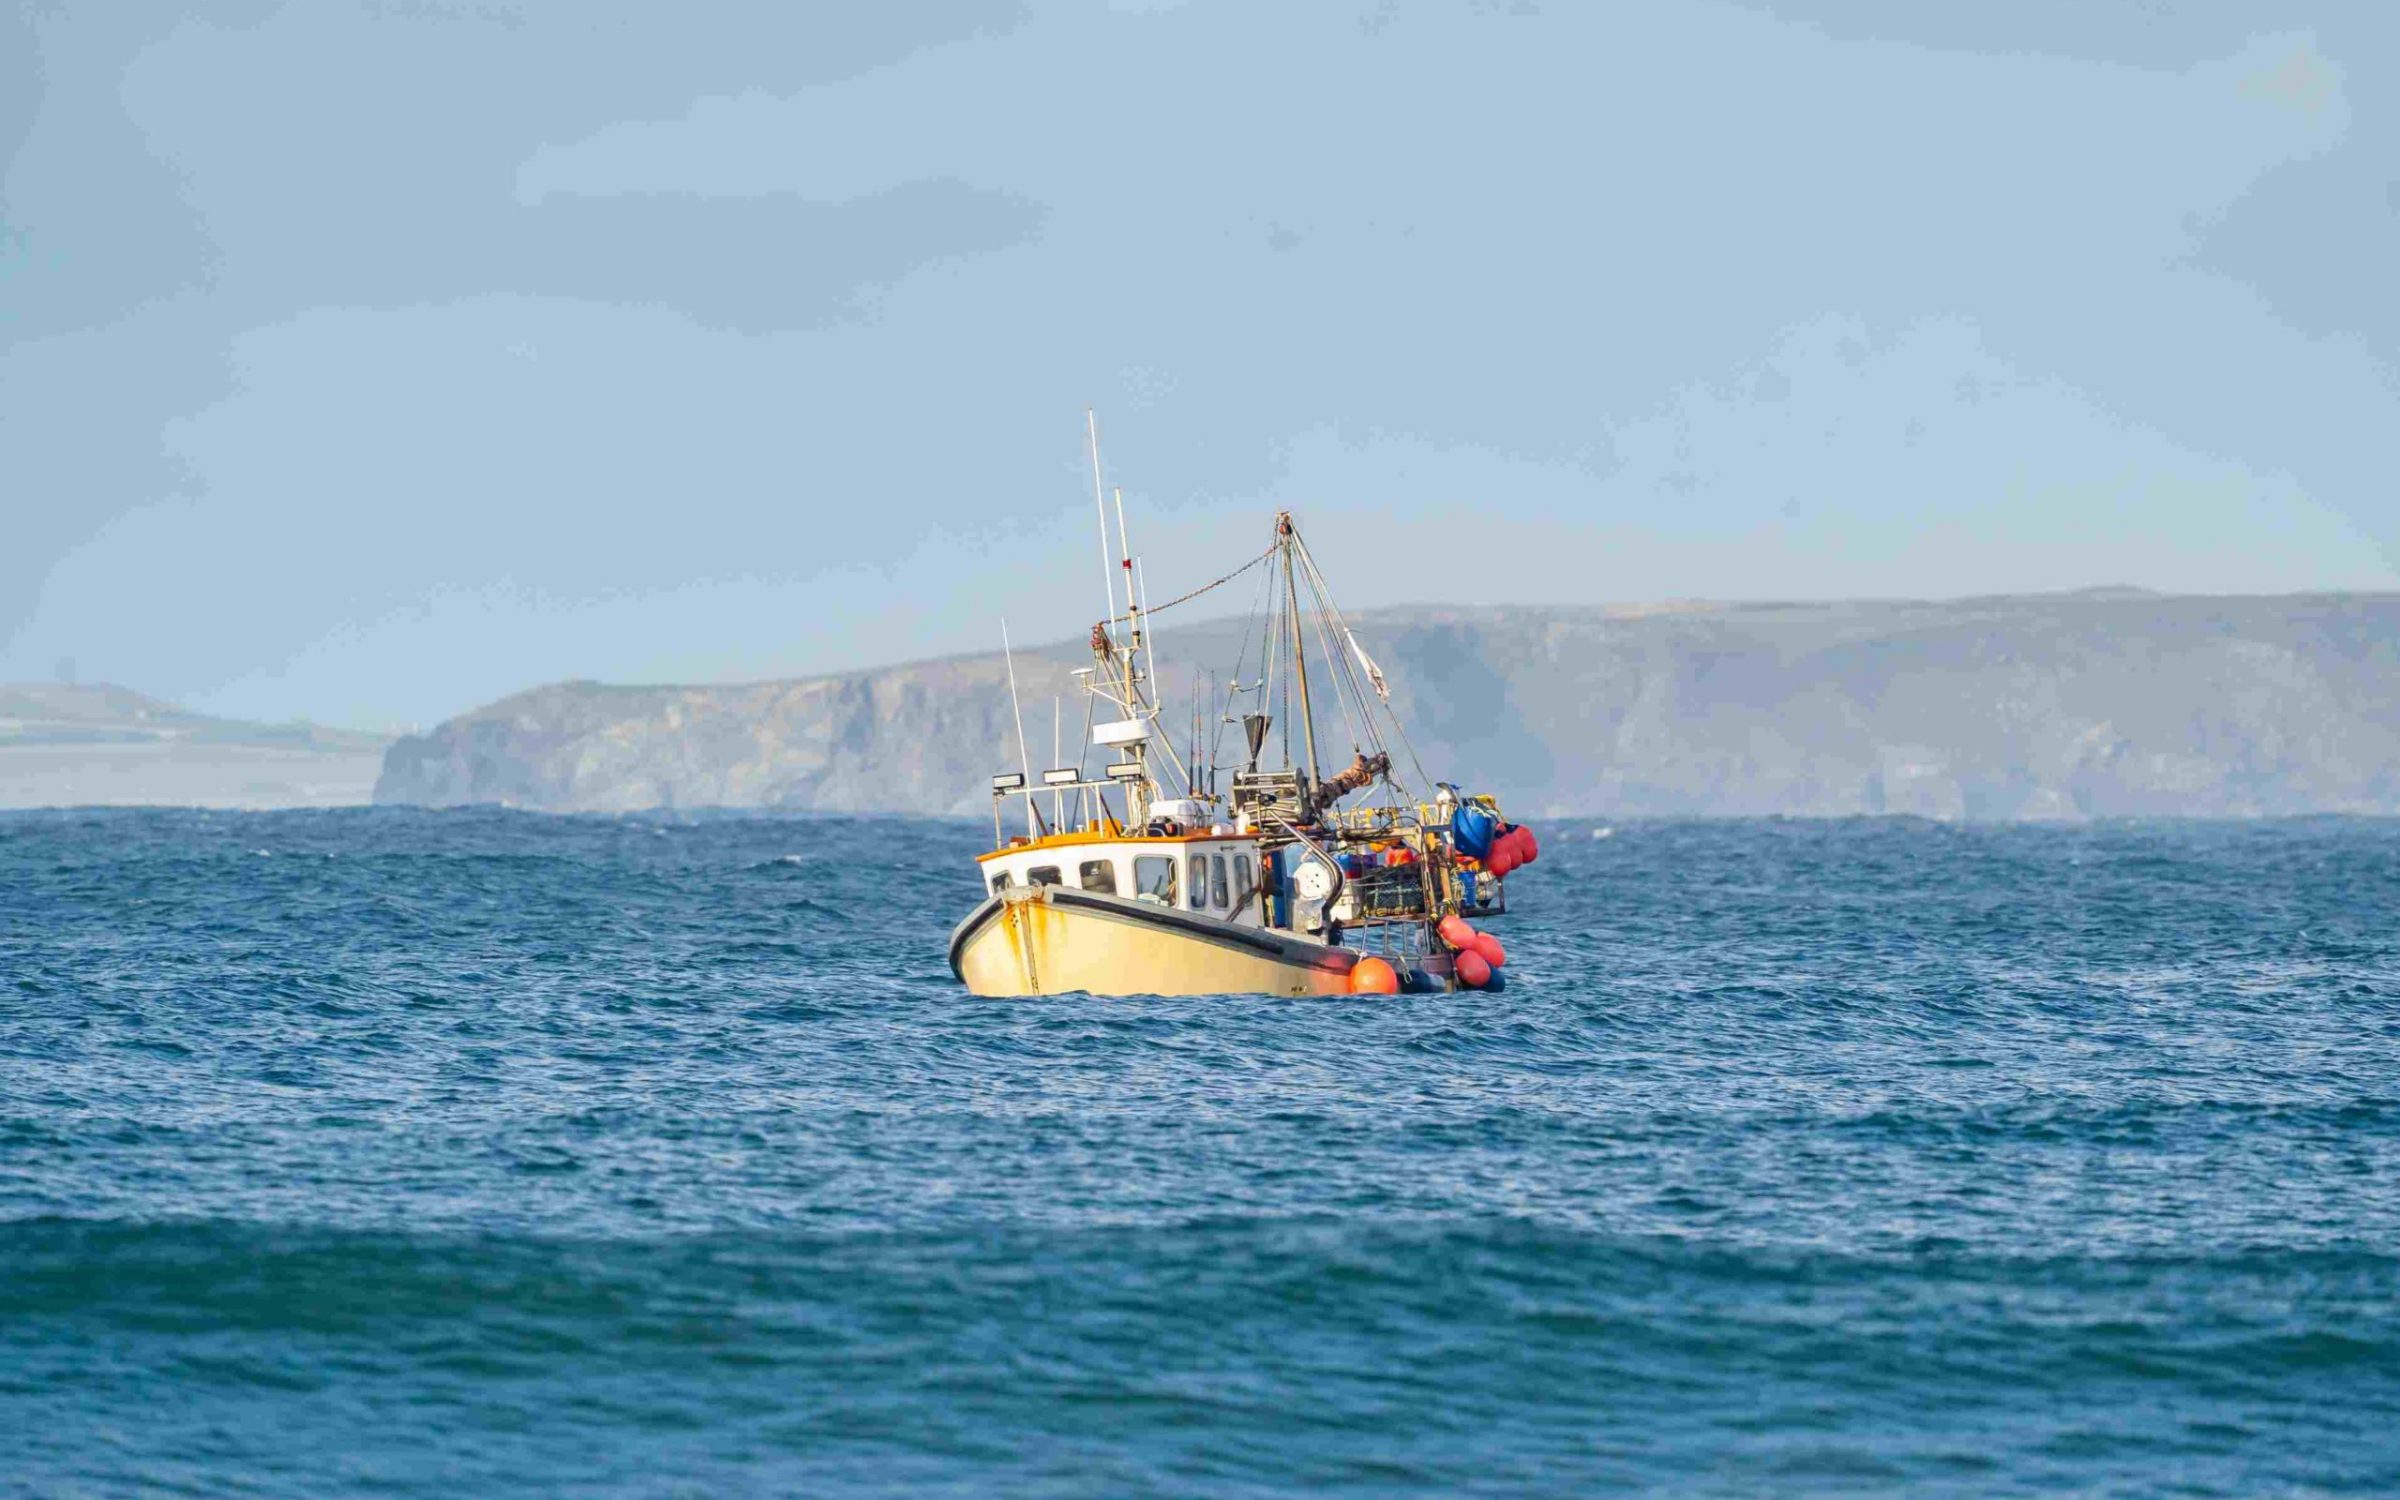 Yellow British fishing boat trawler alone in the English channel islands waters after leaving EU with no French fisherman boats or nets in view.